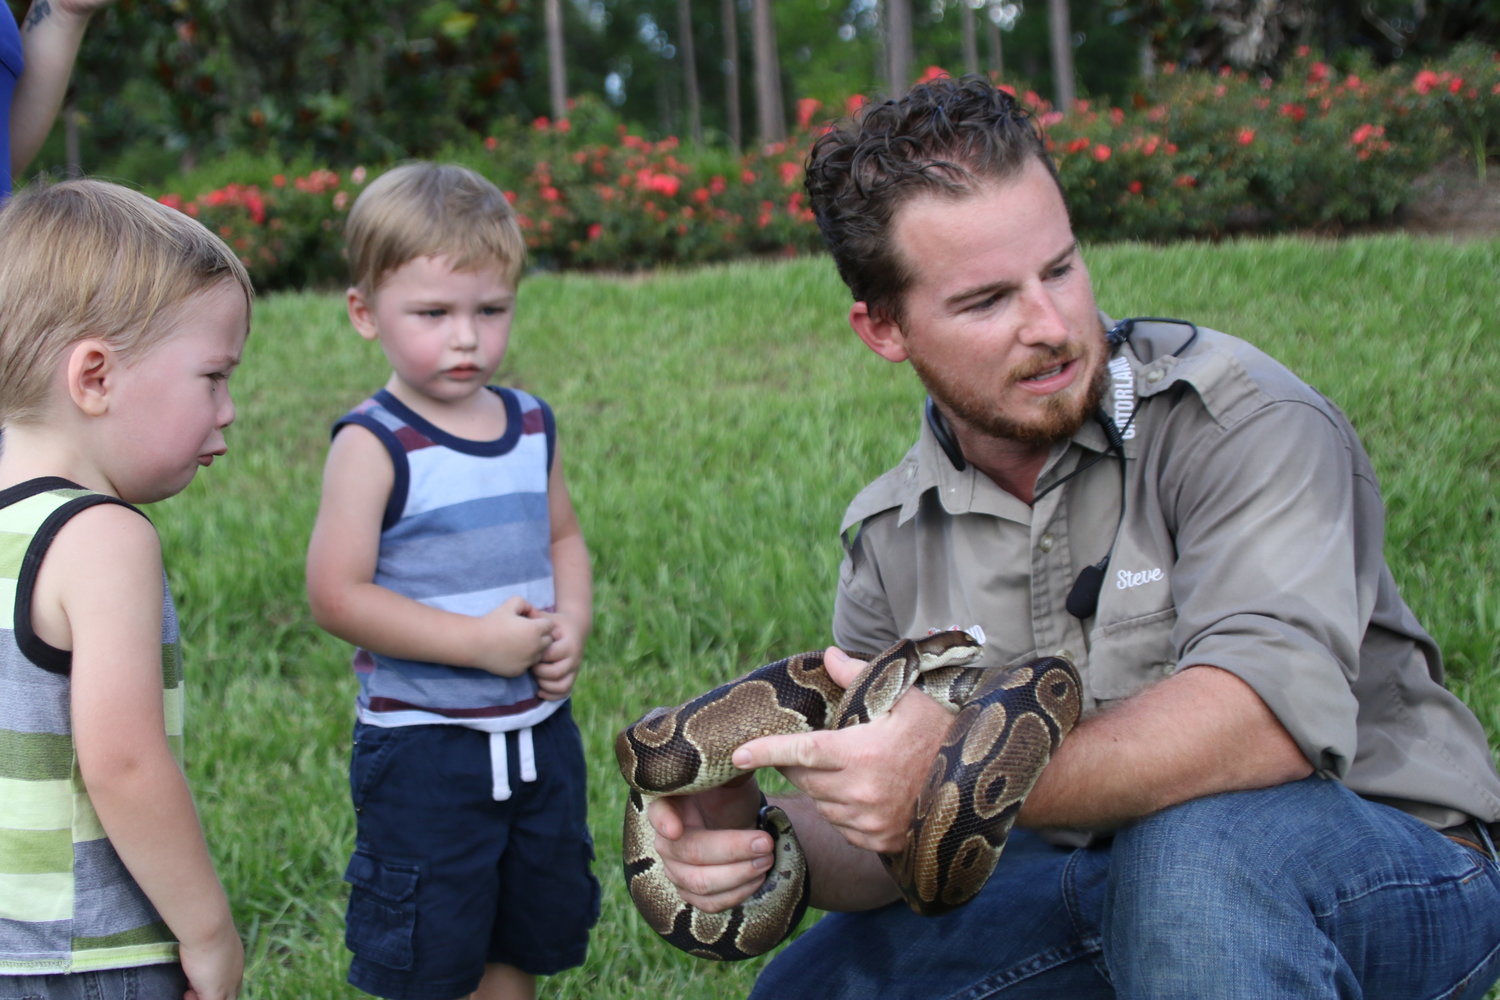 Gatorland’s Stephen Thompson, right, holds a large snake. Donovan and Brendan Muir, both 2 years old, were unsure if they wanted to approach the reptile.